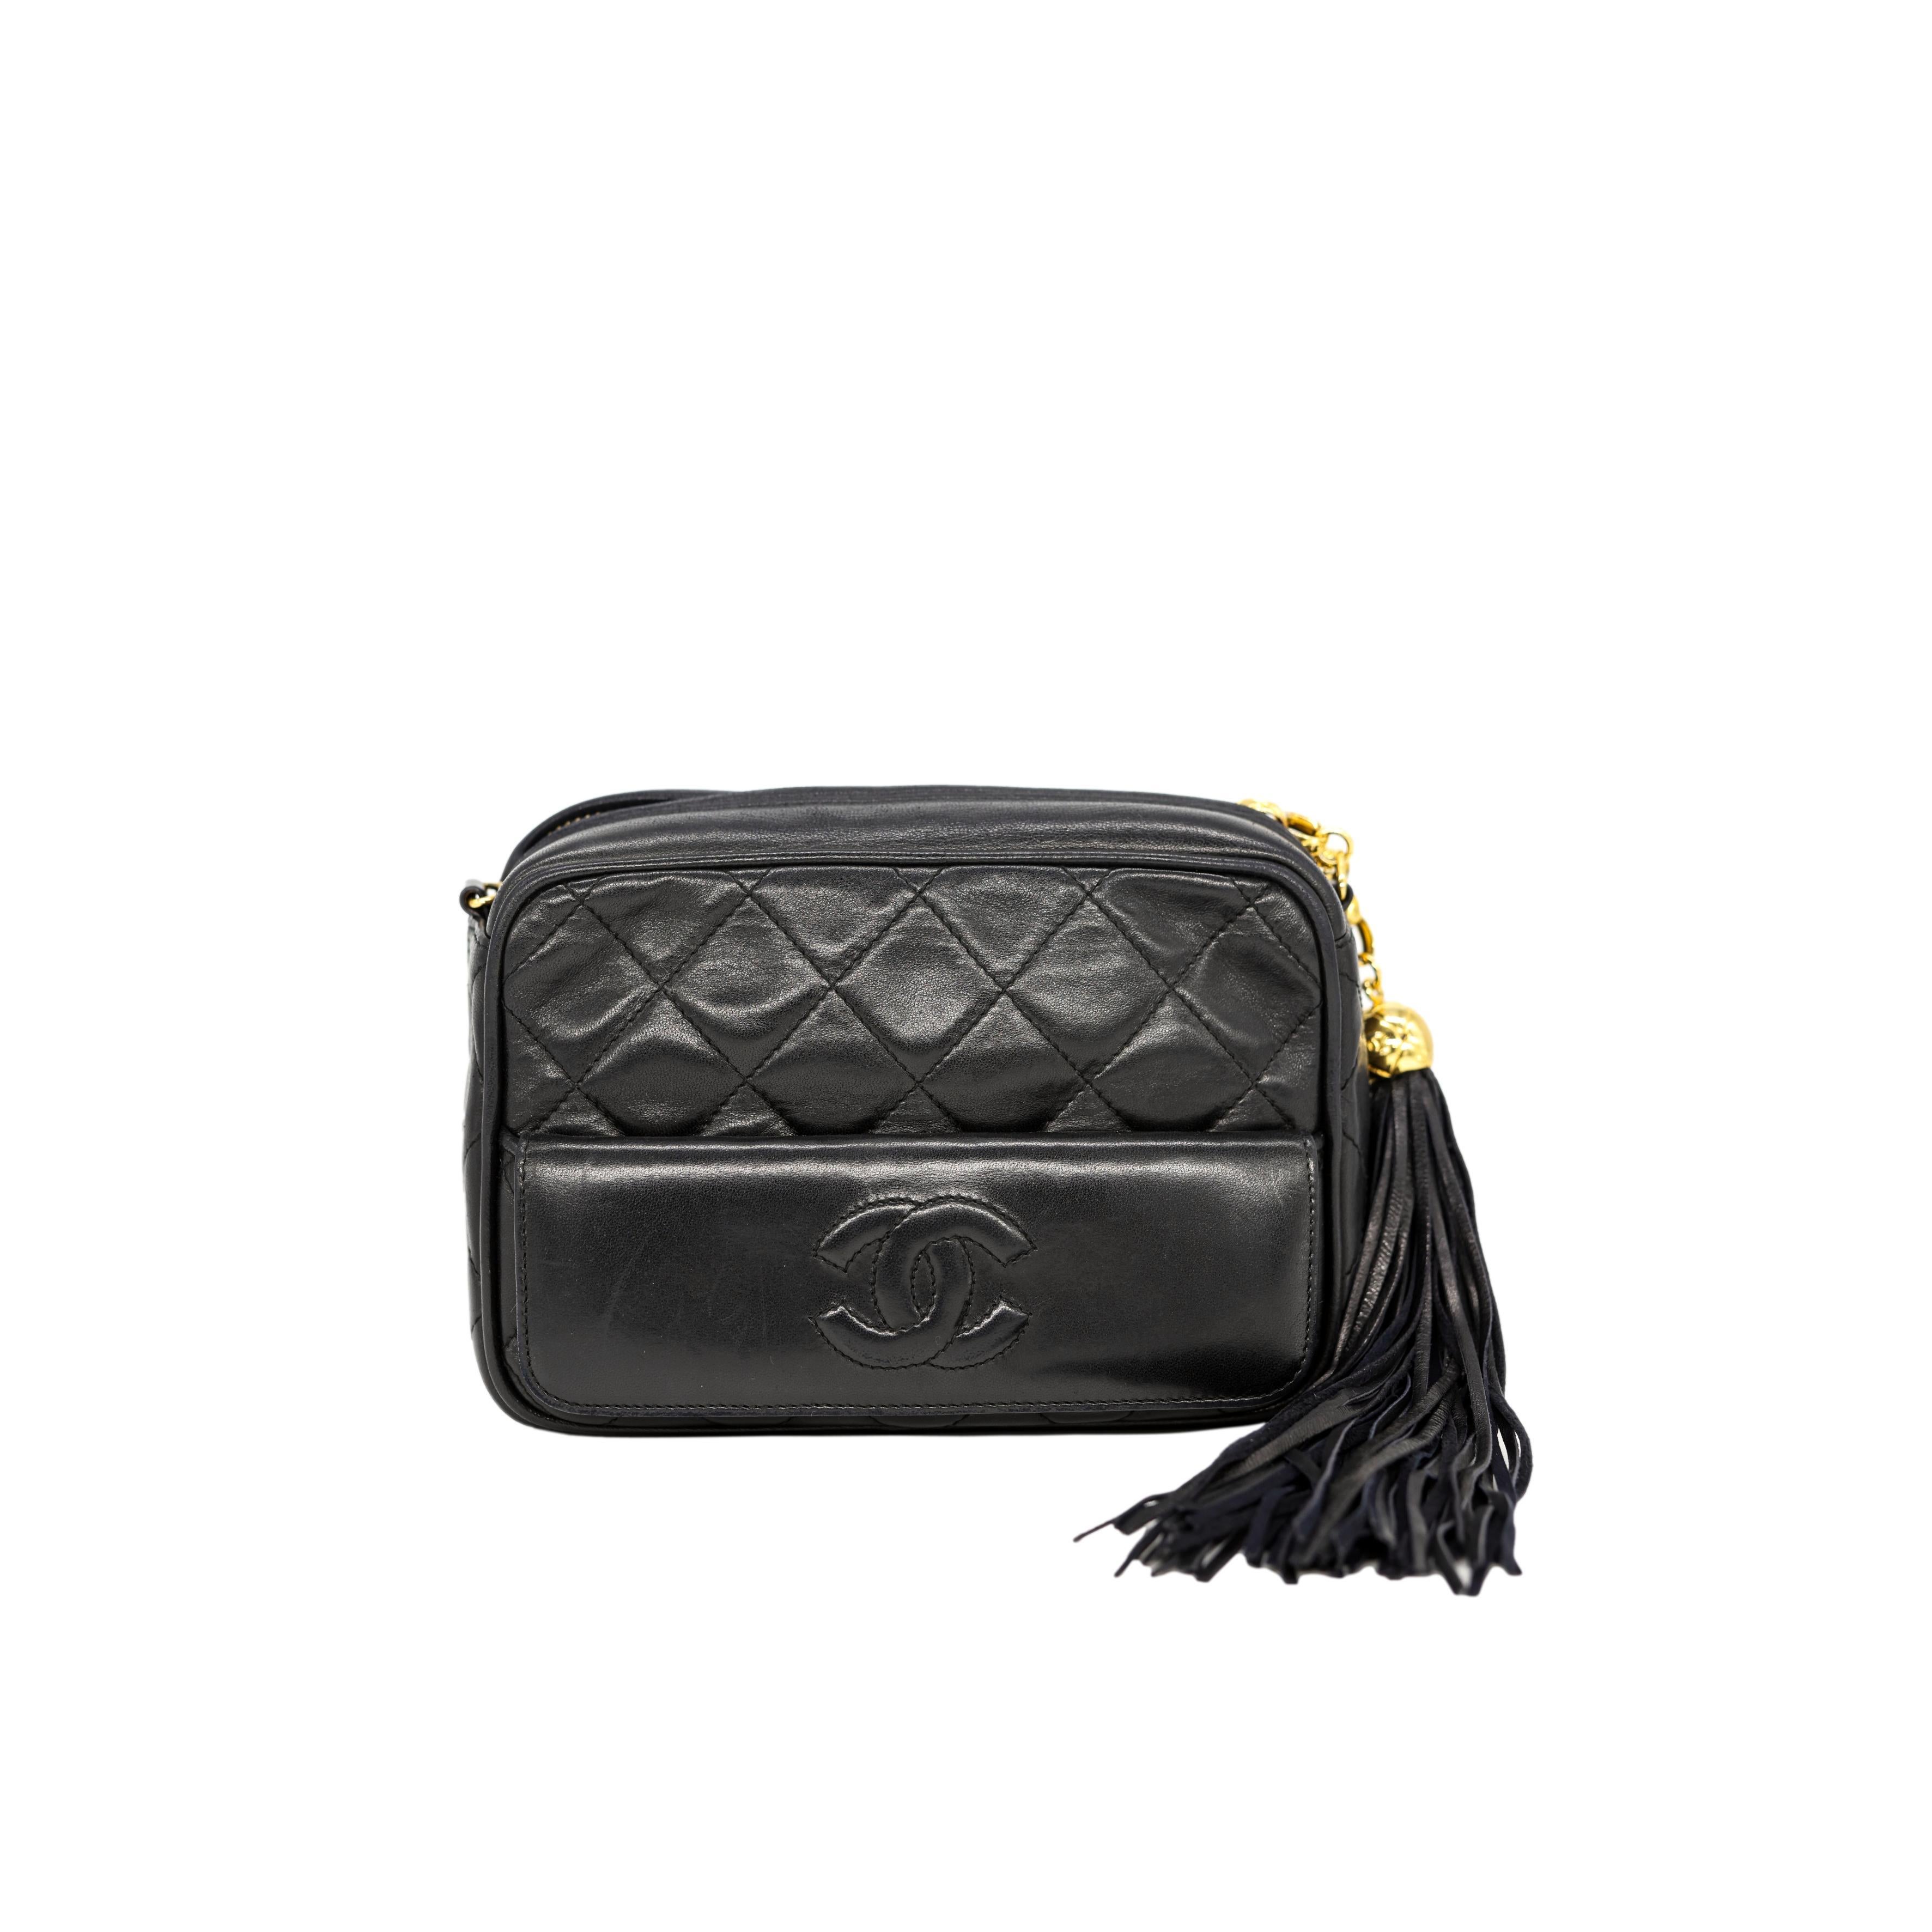 Chanel Black Lambskin Mini Tassel Camera Bag with 24KT Hardware, 1989 - 1991. This extremely rare and highly sought after piece of Chanel history was one of the very first camera bags produced, baring a serial code of 